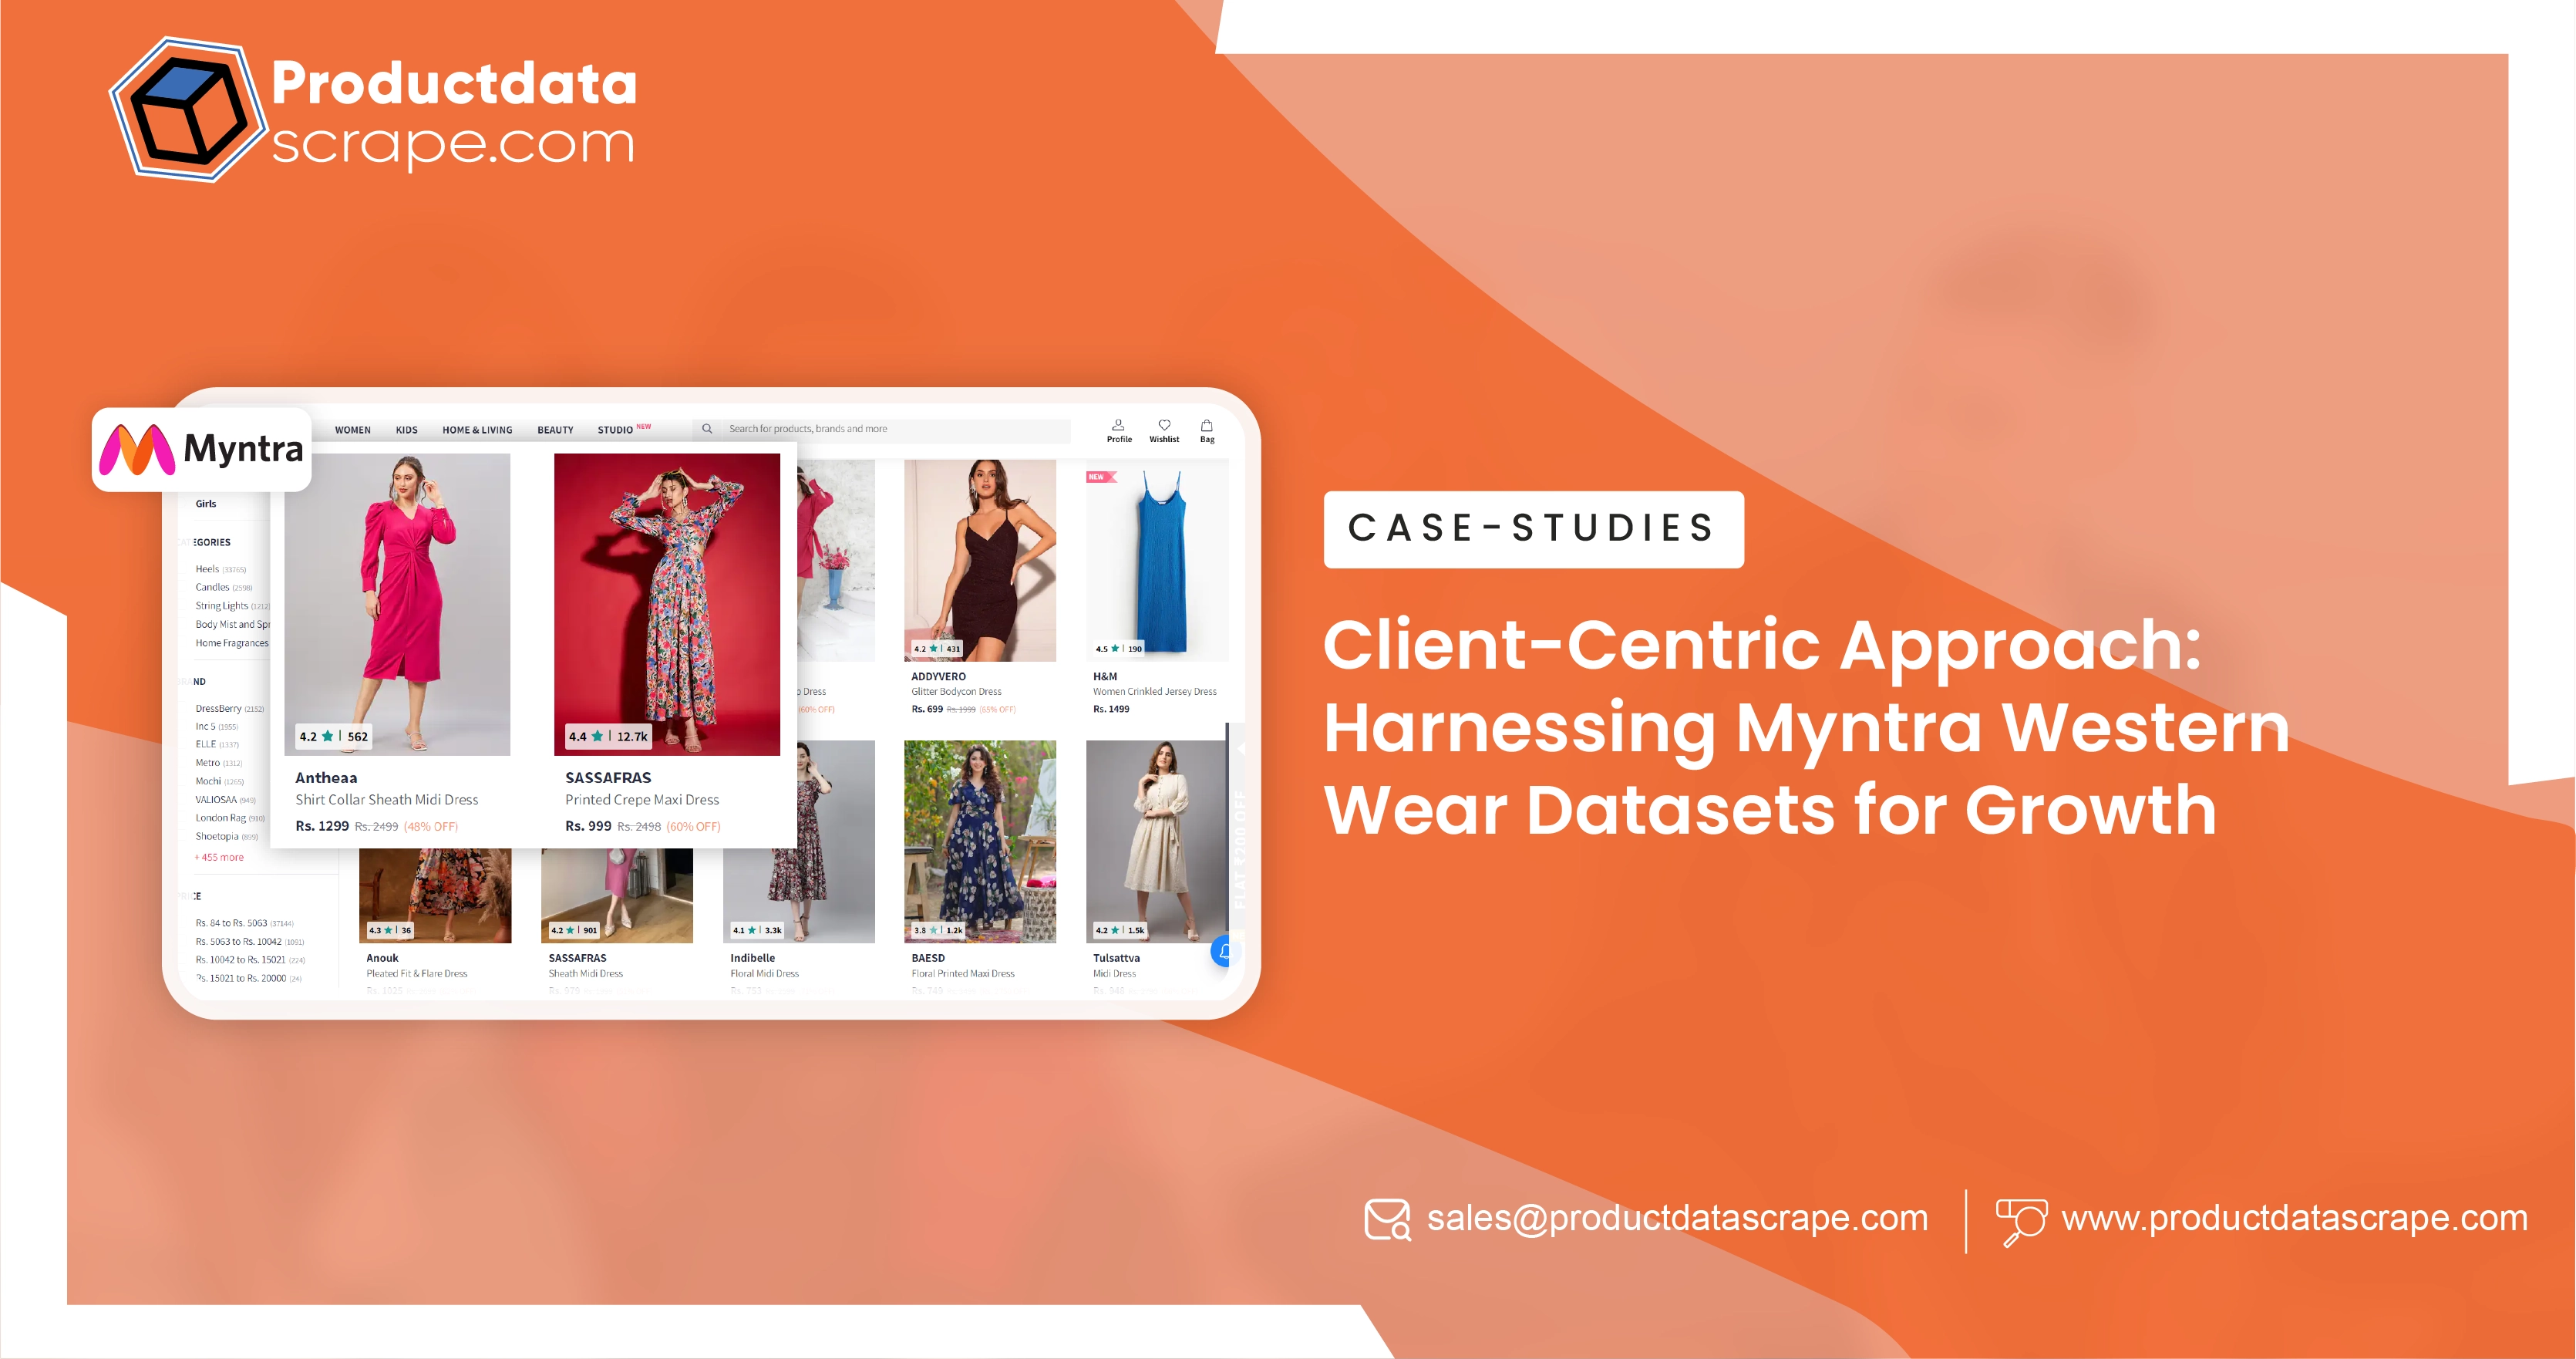 Client-Centric-Approach-Harnessing-Myntra-Western-Wear-Datasets-for-Growth-01